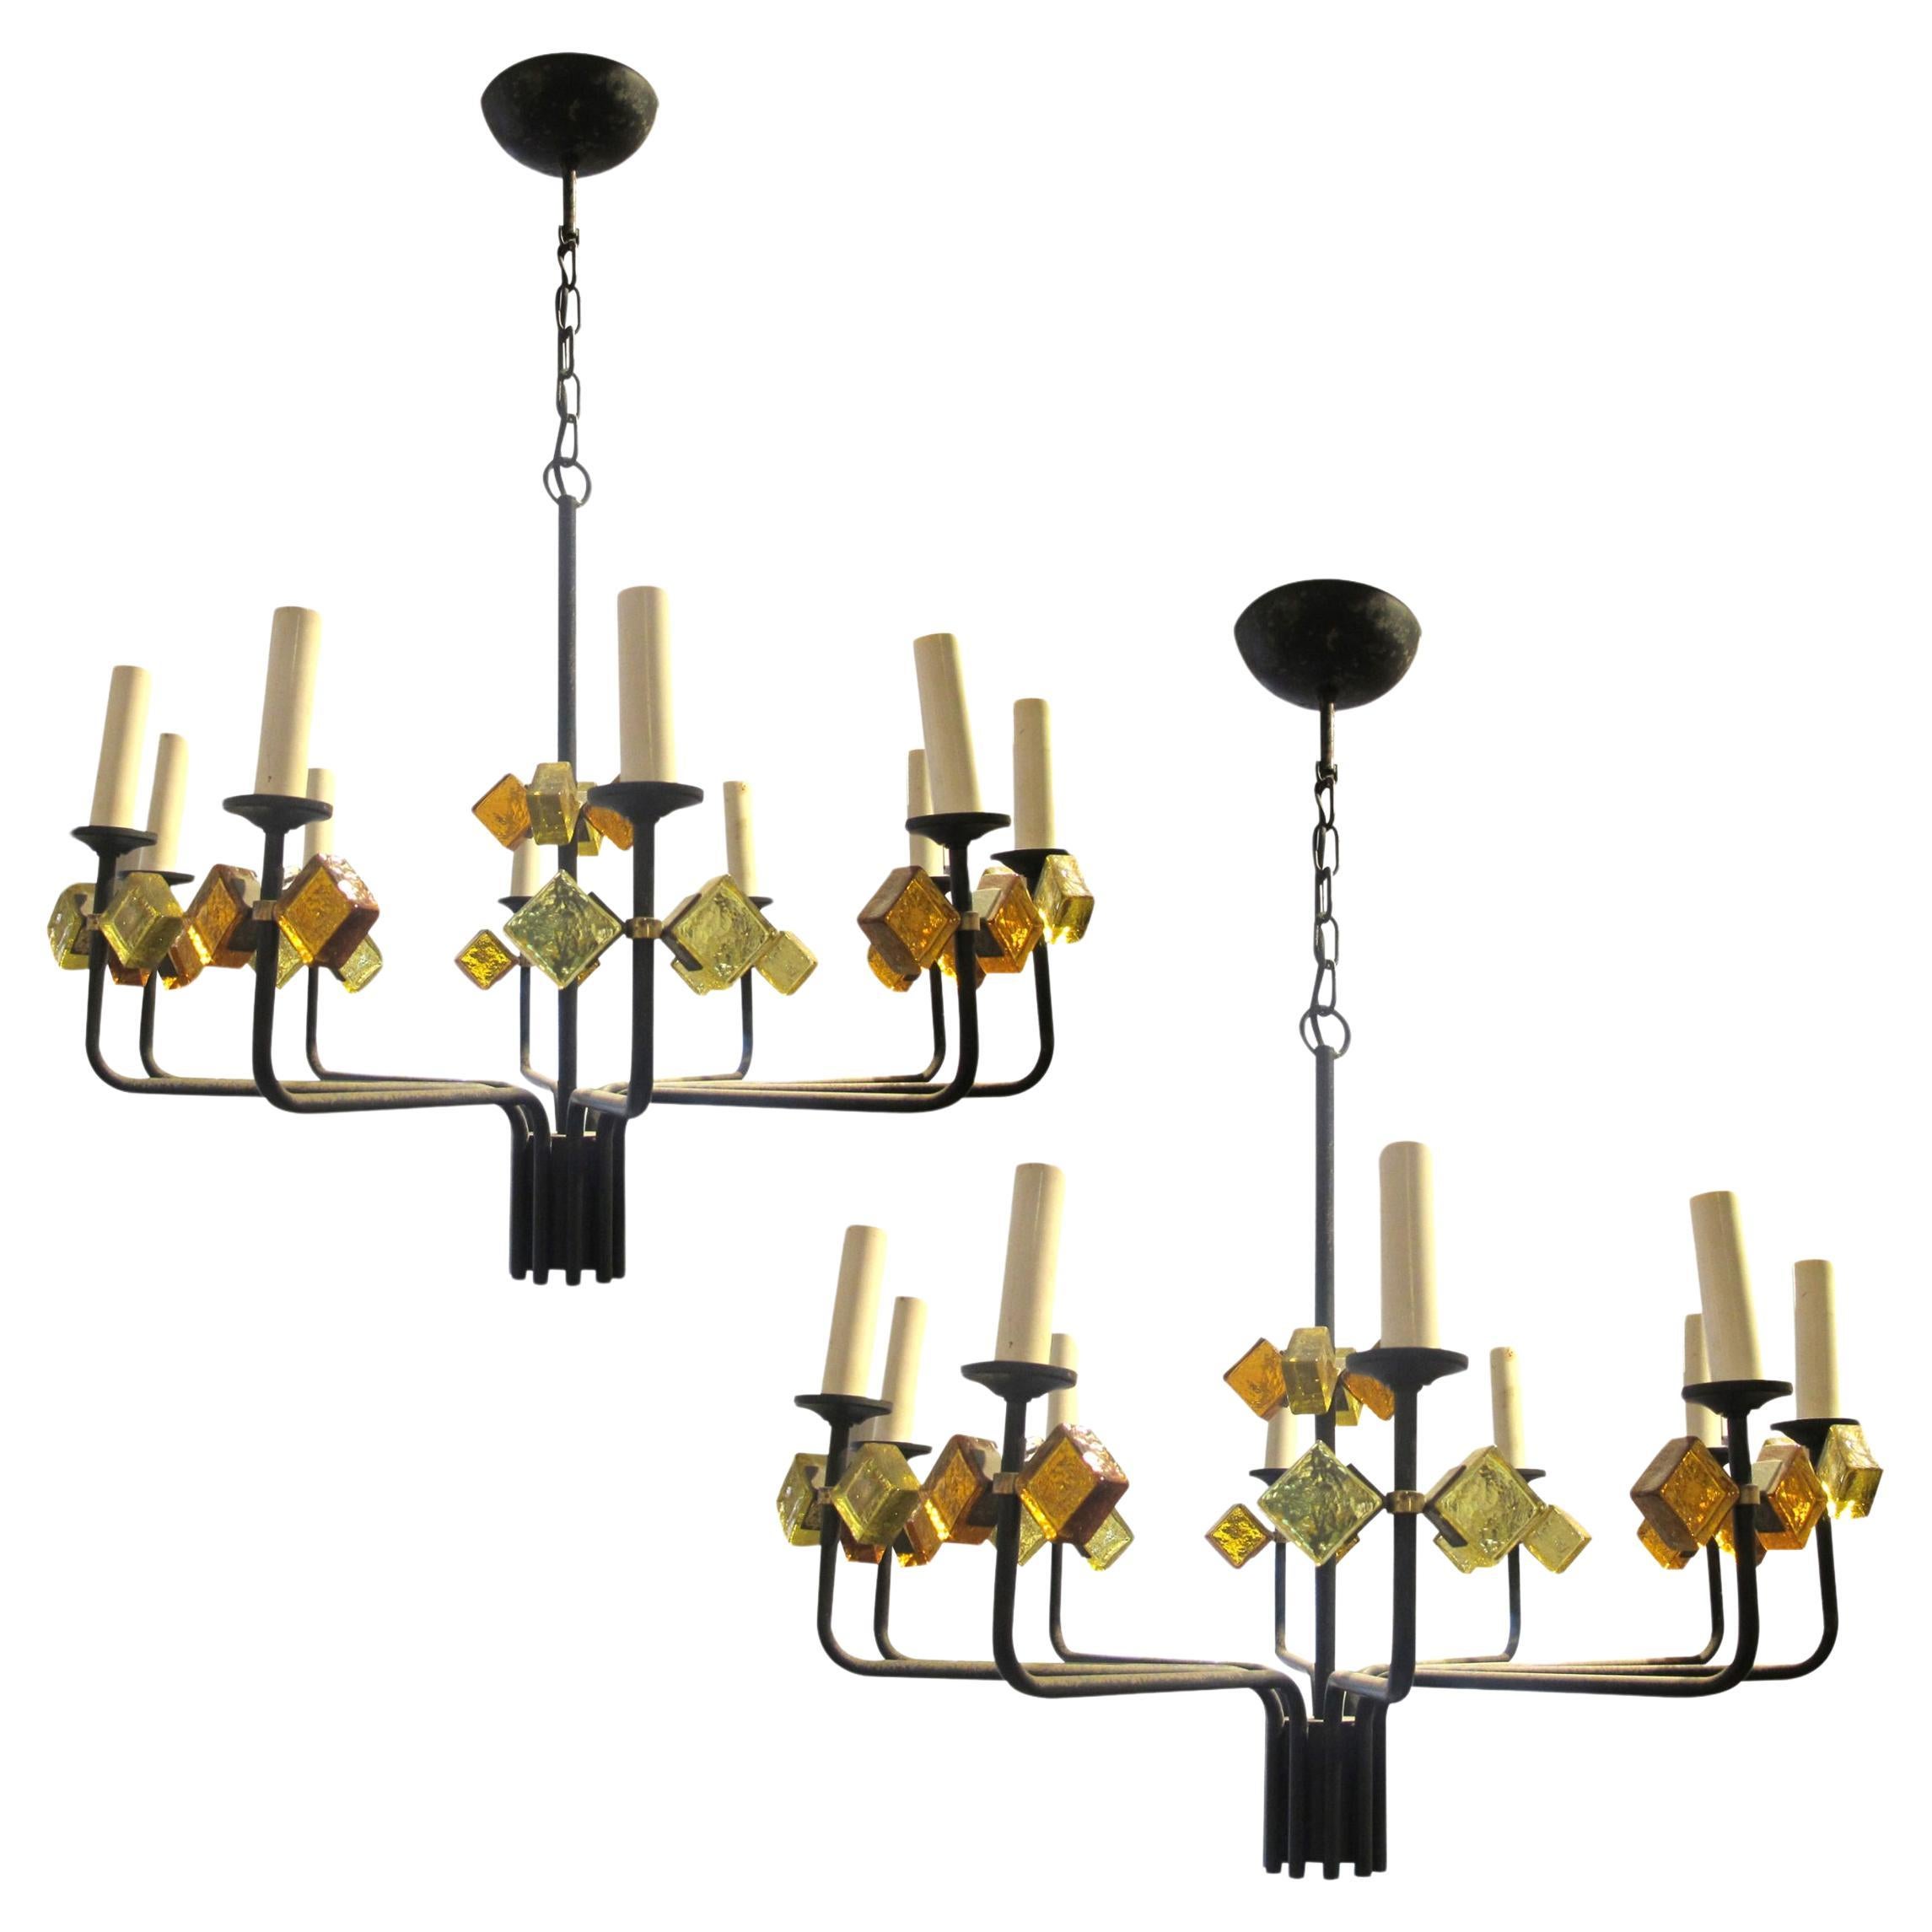 1950s Danish Pair of Iron and Coloured Glass Chandelier By Svend Aage Holm Soren